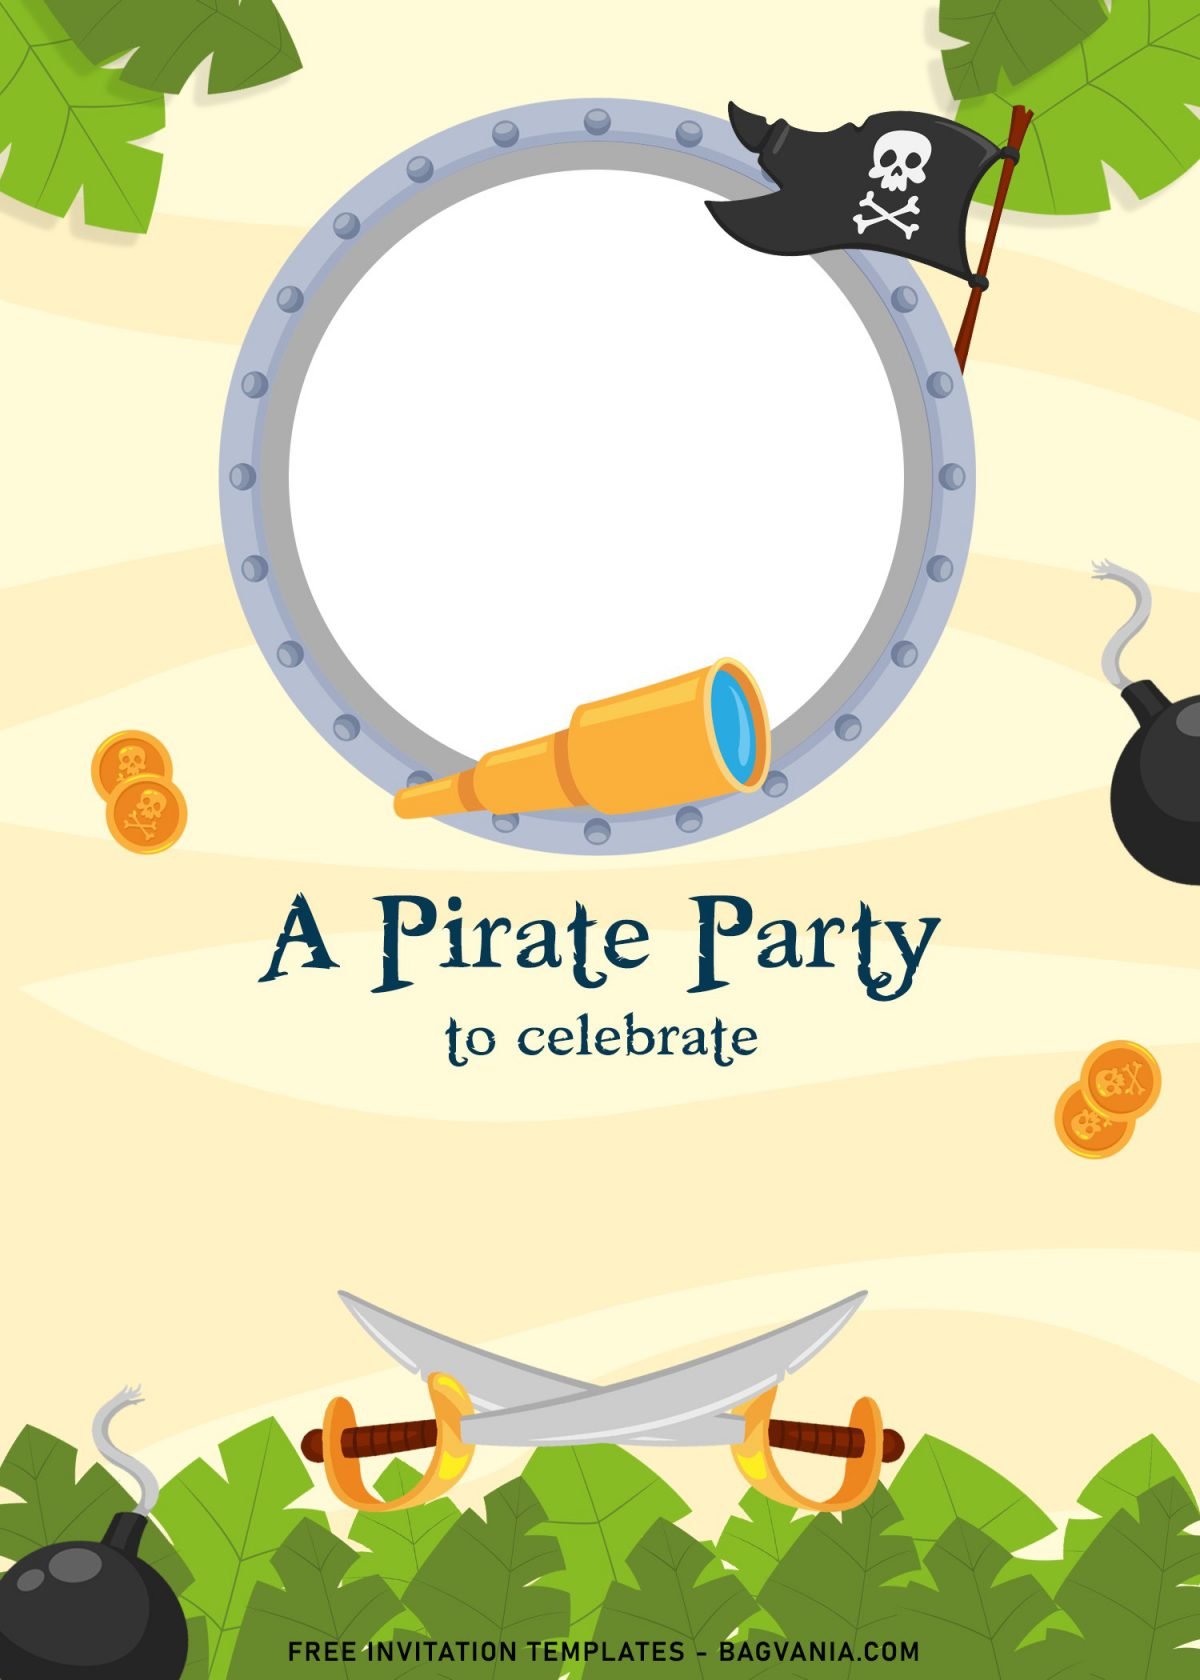 9+ Cute Pirate Birthday Invitation Templates For Your Son's Upcoming Birthday and has Pirate's Spyglass